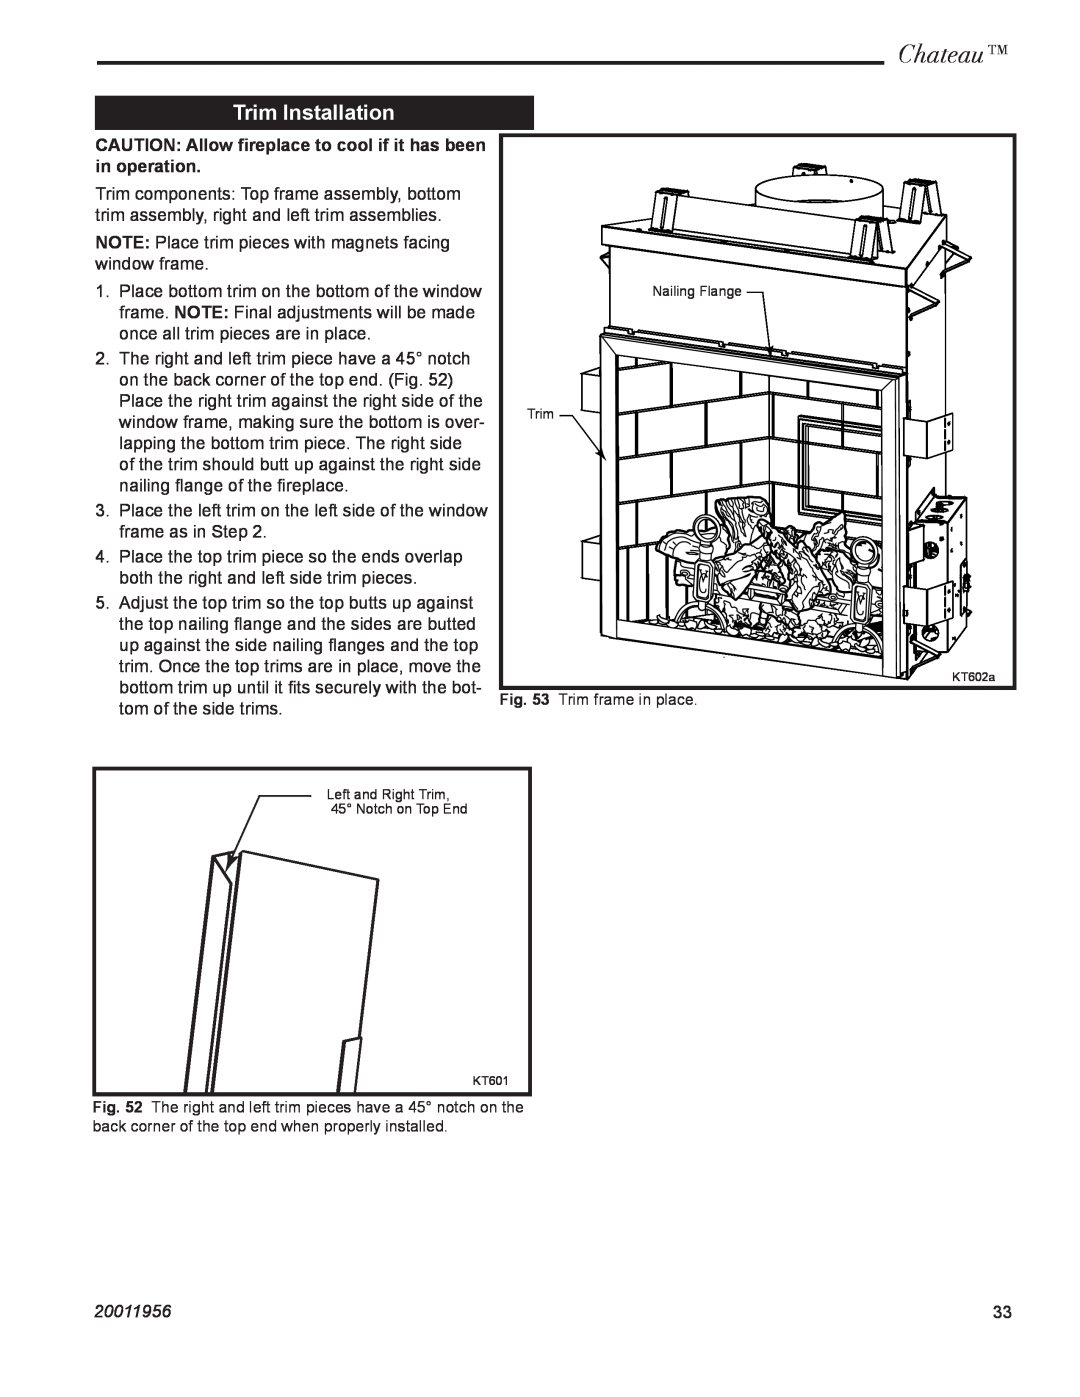 CFM Corporation DVT38IN, DVT44IN installation instructions Trim Installation, Chateau, 20011956, Trim frame in place 